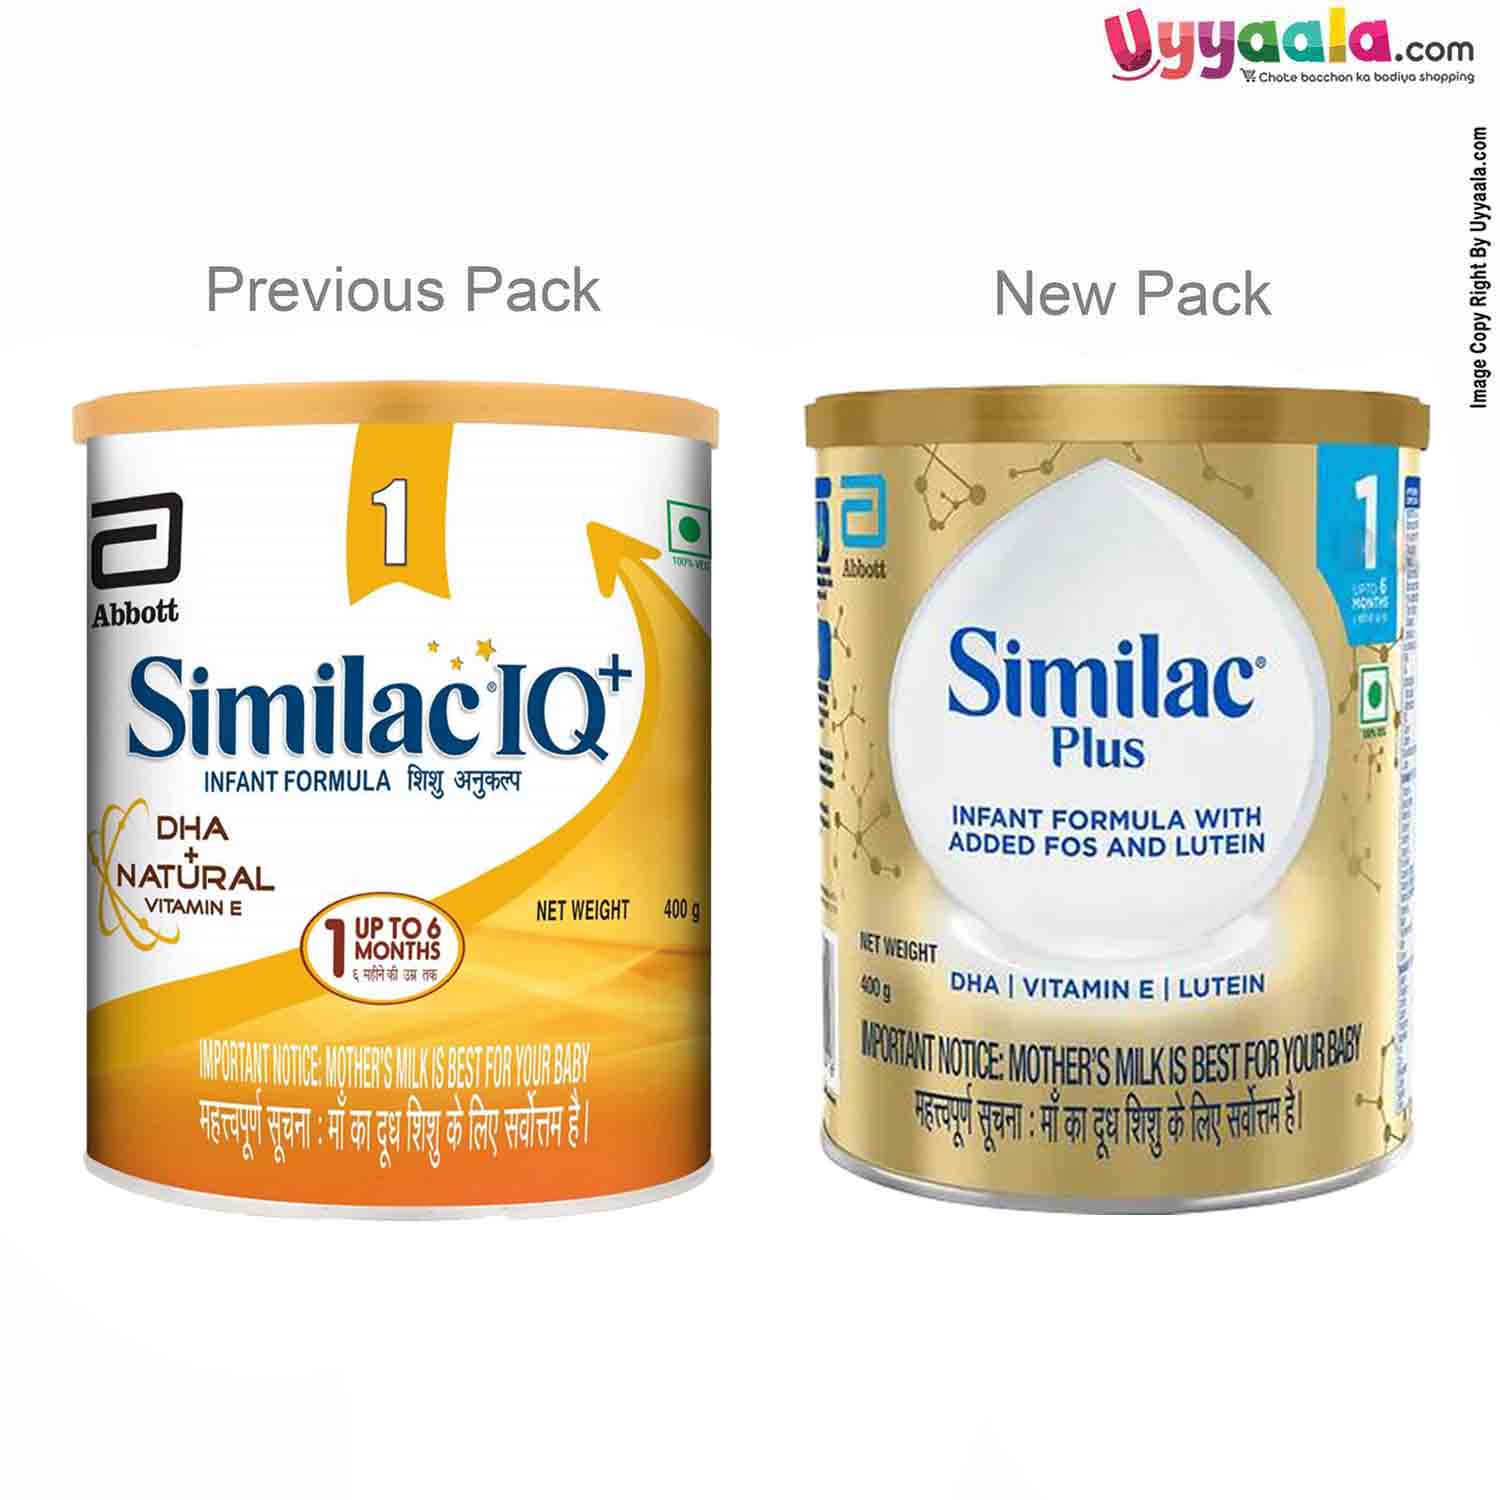 ABBOTT Similac IQ+ infant formula stage 1, 0 to 6 months new pack